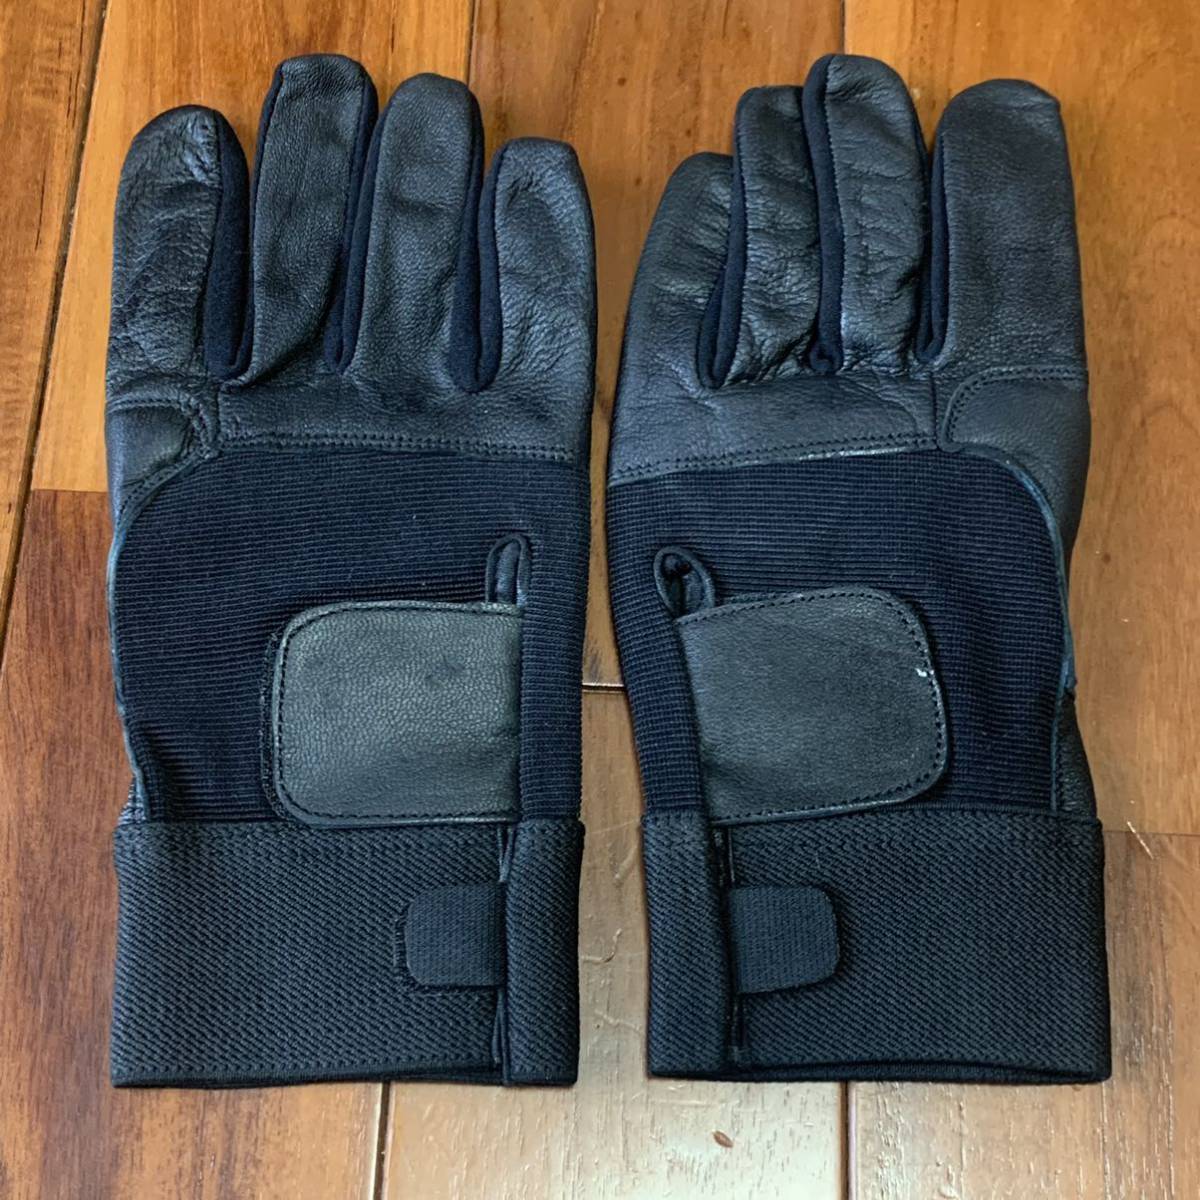  Okinawa the US armed forces discharge goods IMPACT GLOVES leather glove gloves sport cycling outdoor MEDIUM black ( control number I3)